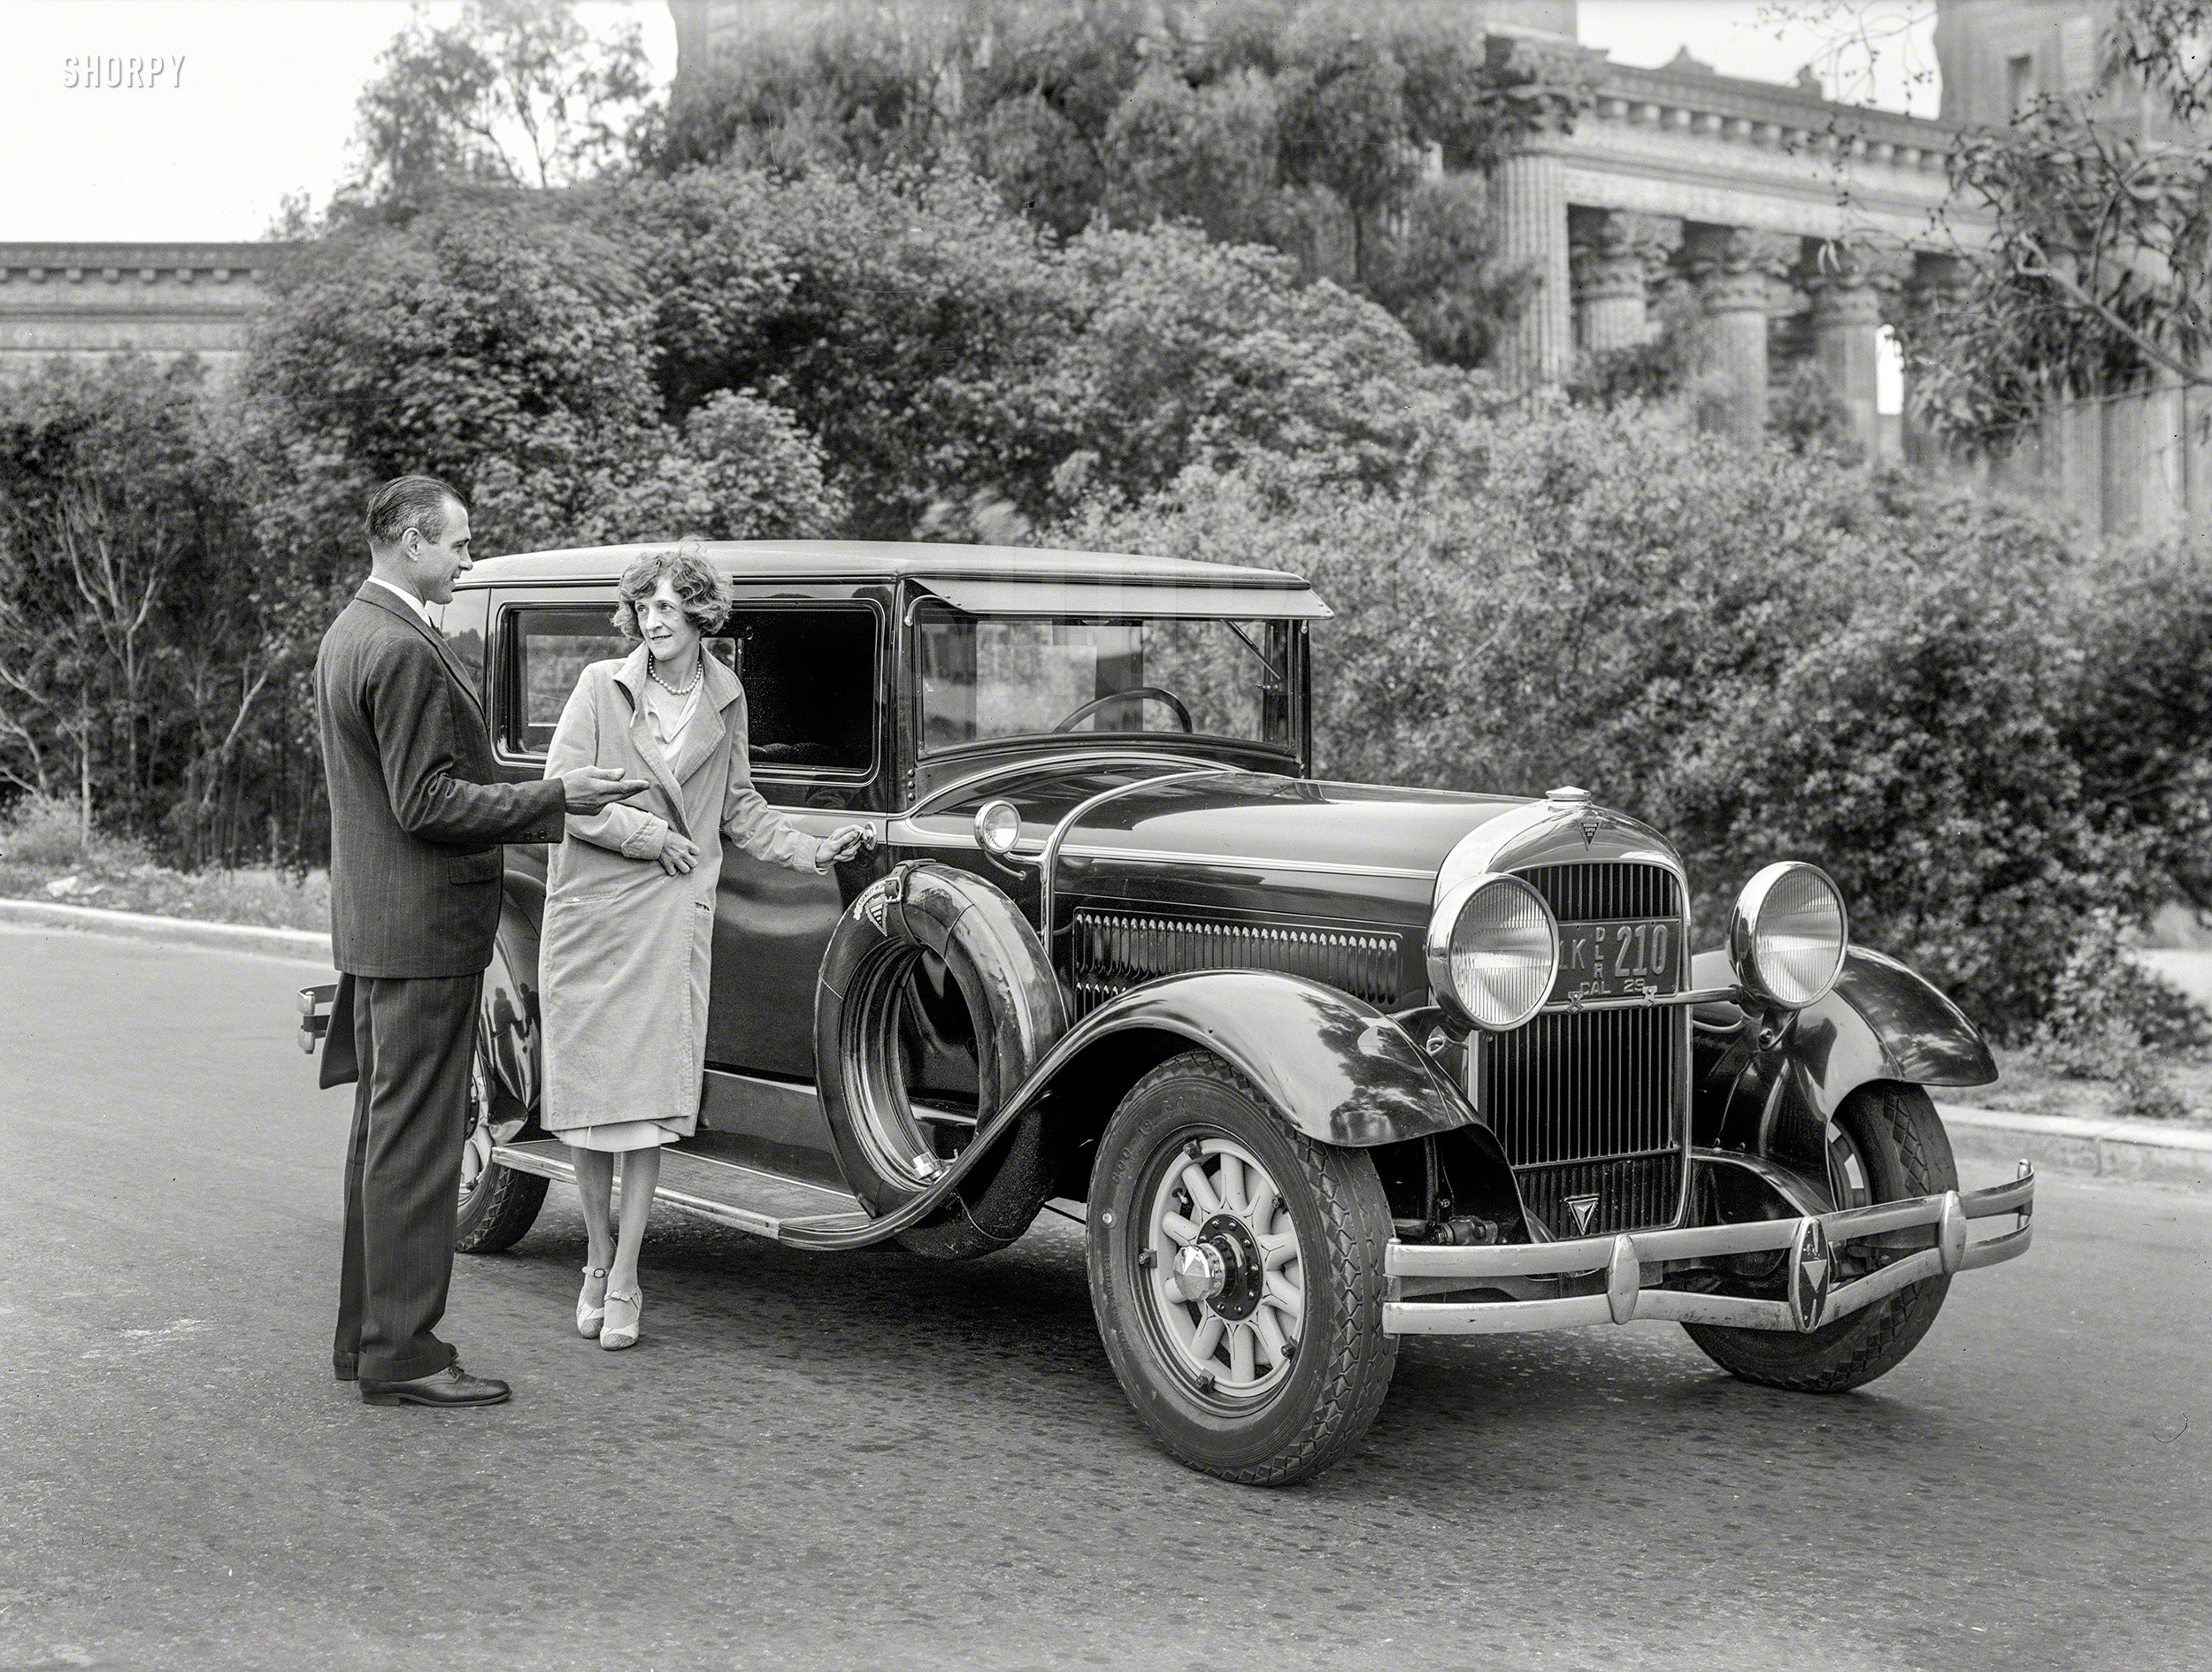 San Francisco, 1929. "Hudson Super Six." Strangers when they met, until he took her for a ride. 5x7 inch glass negative by Christopher Helin. View full size.